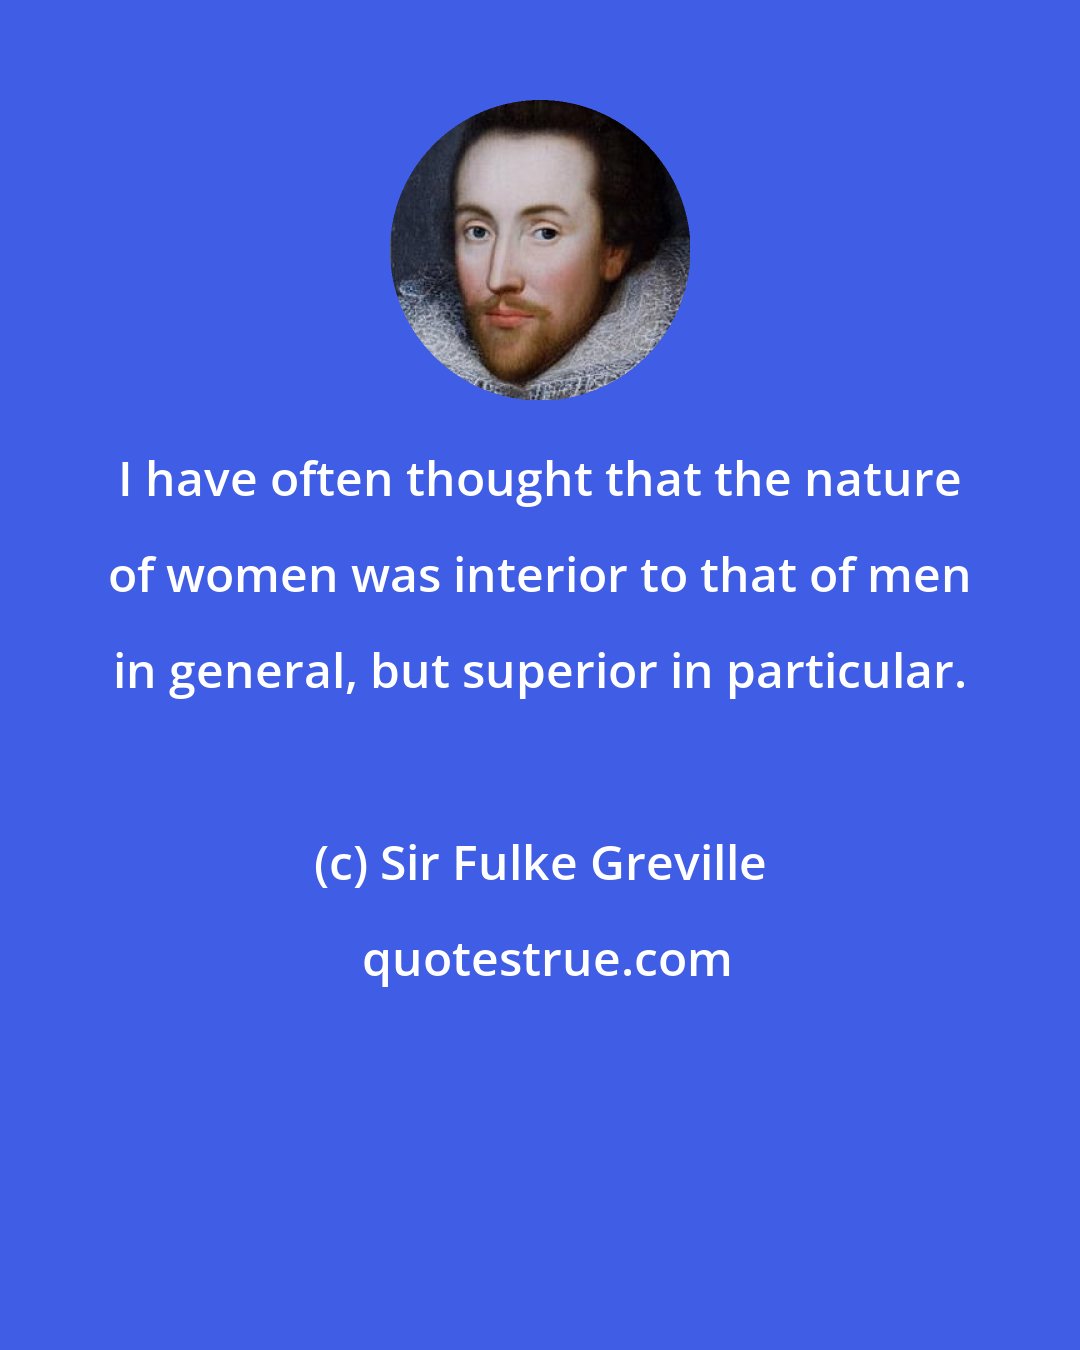 Sir Fulke Greville: I have often thought that the nature of women was interior to that of men in general, but superior in particular.